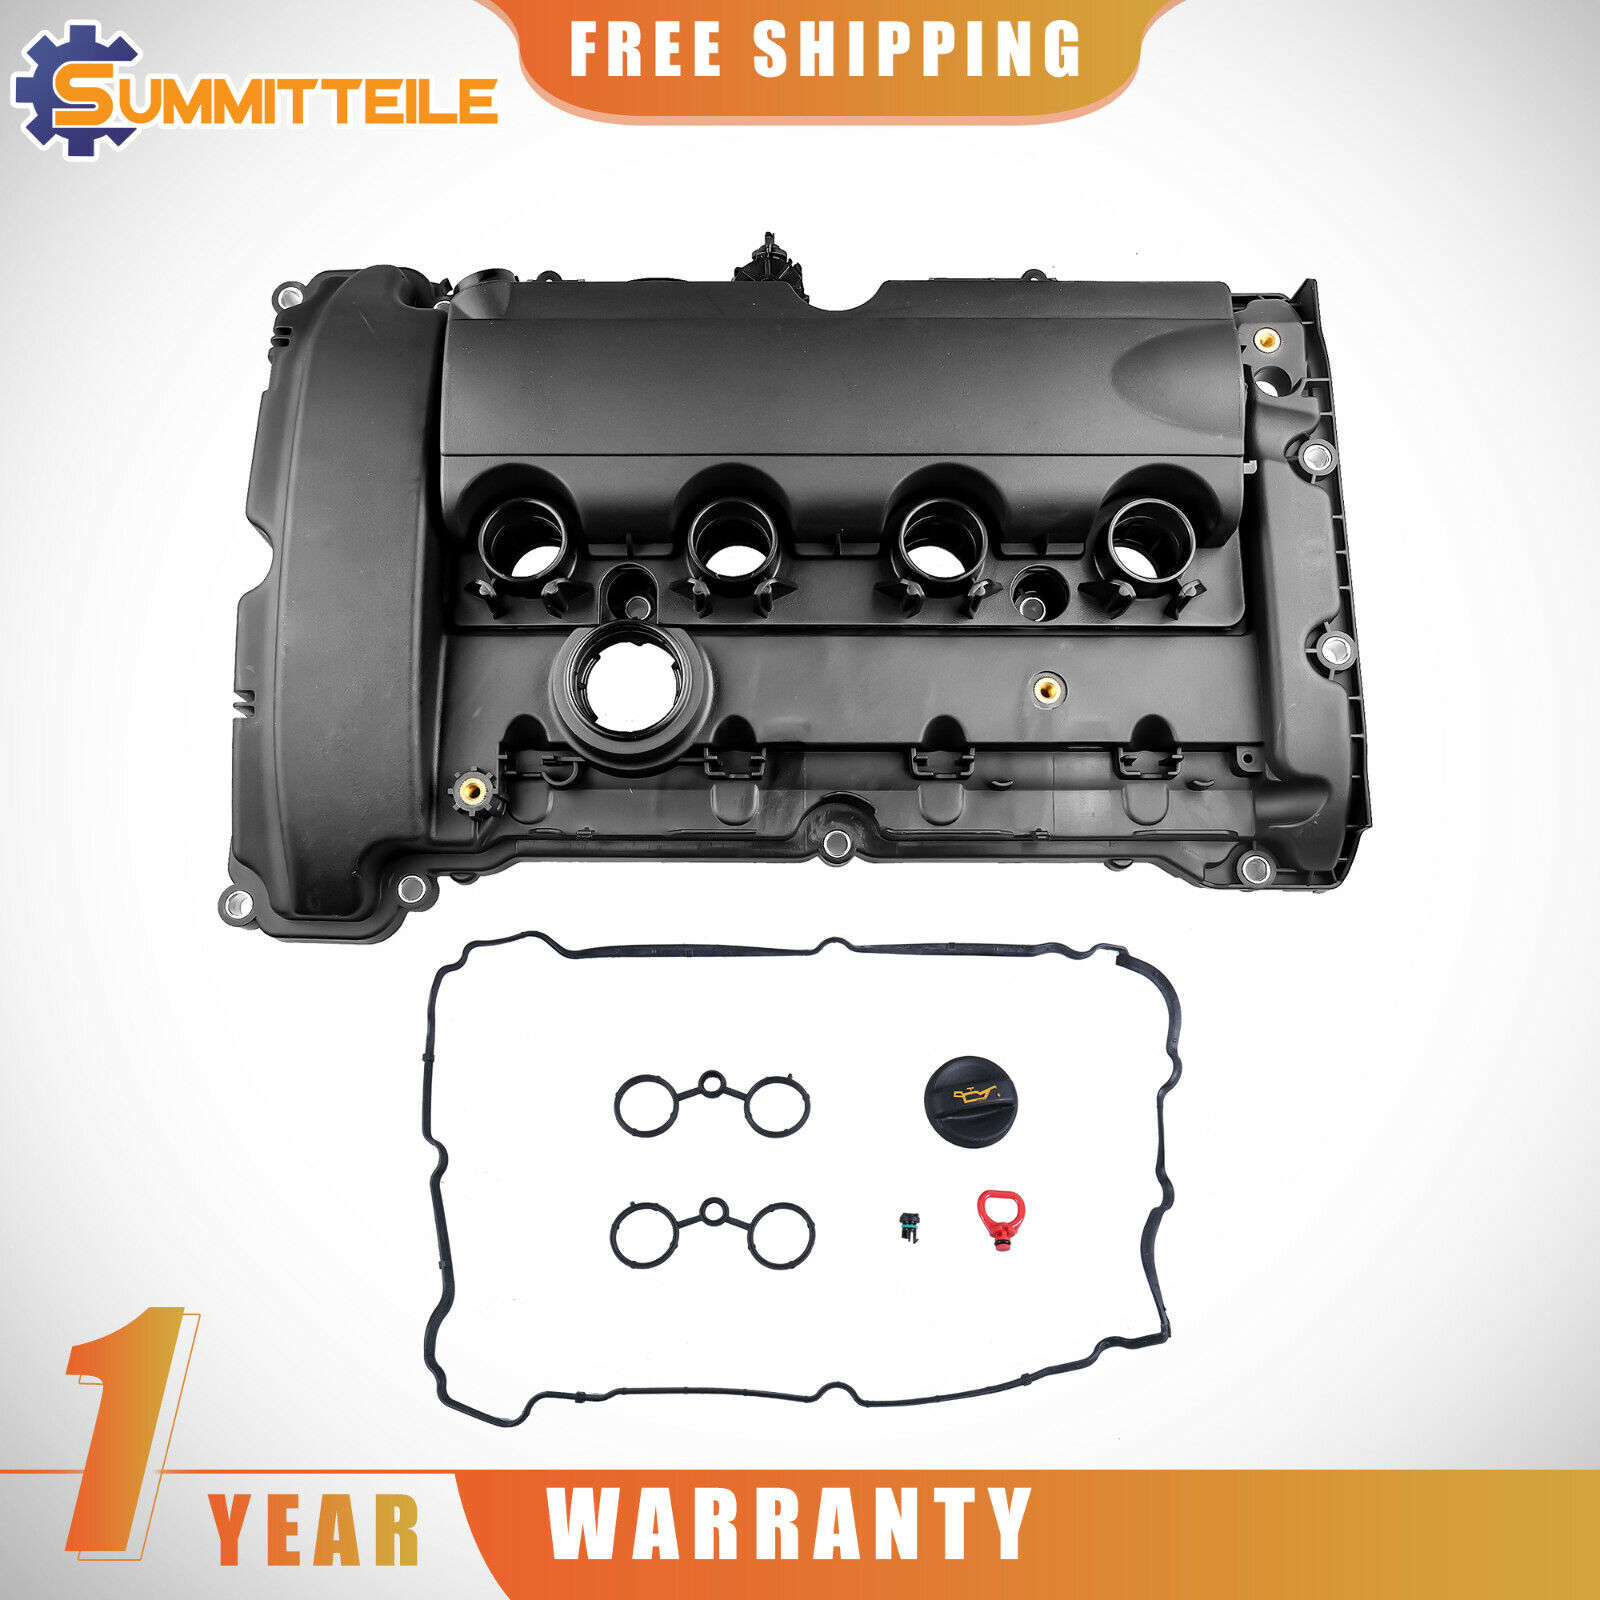 Engine Valve Cover W/ Gasket Cap For 2007-2012 Mini Cooper S R55 R56 R57 R60 New